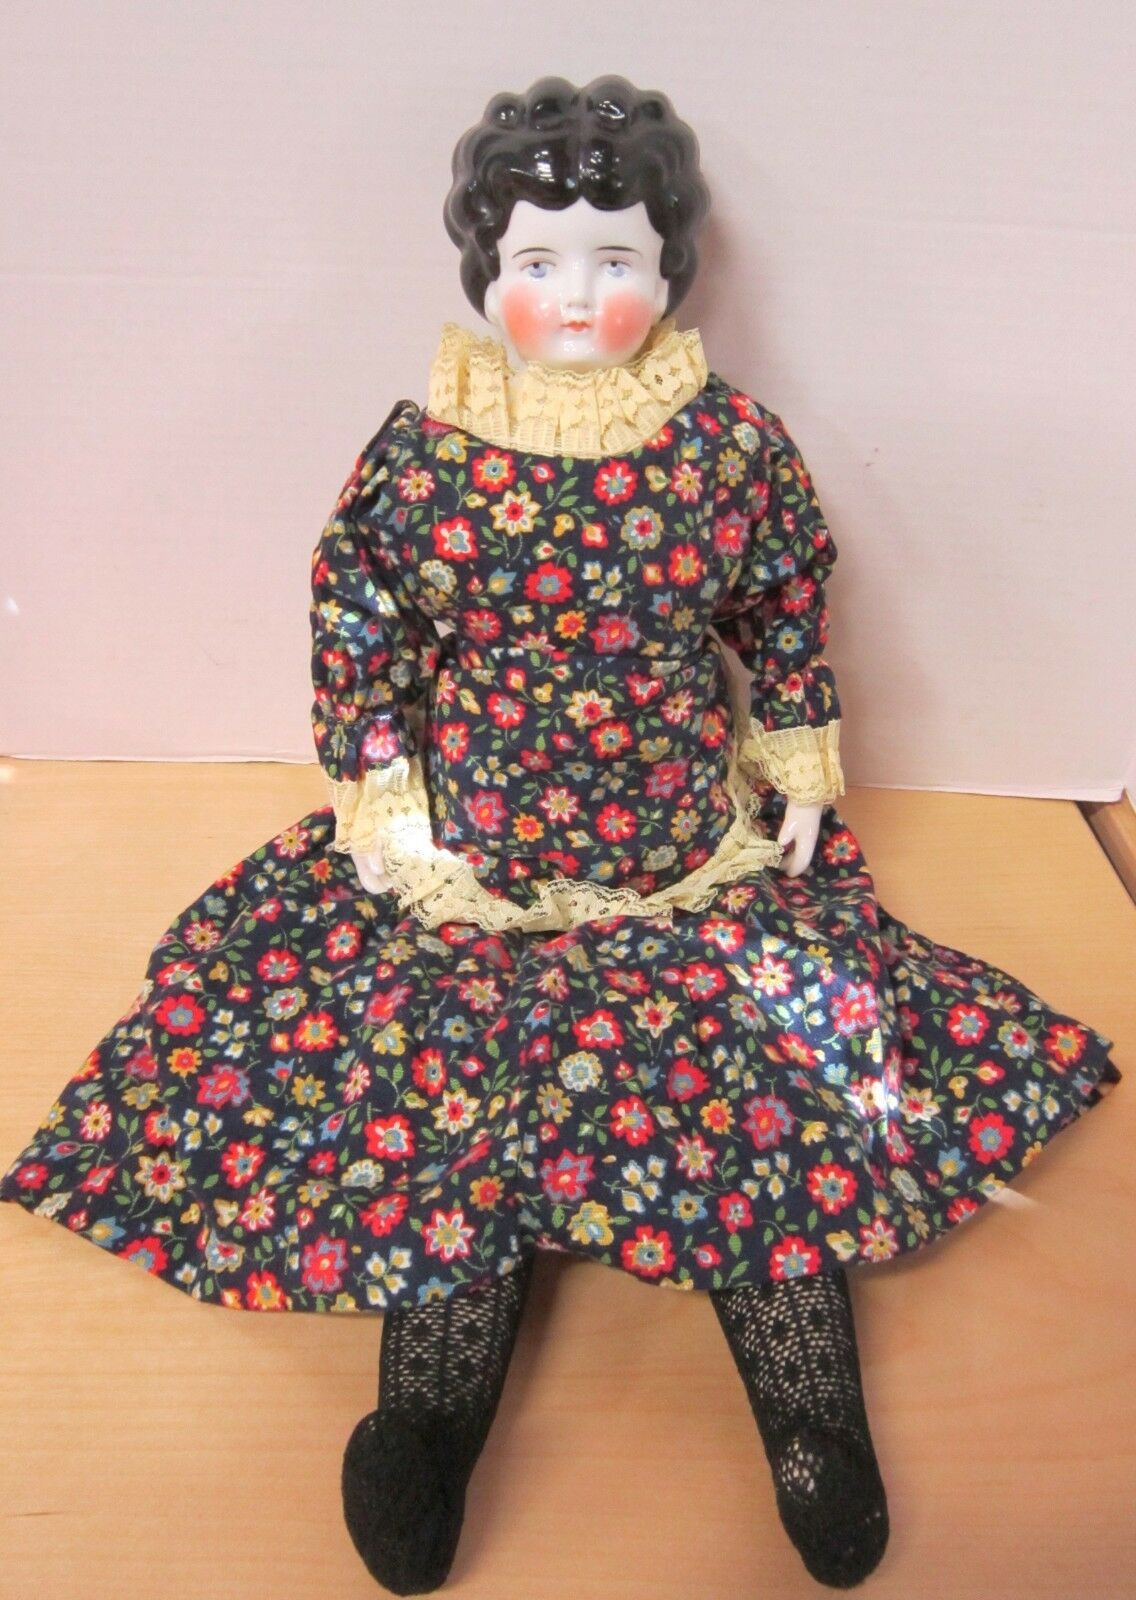 22" Germany China Head Doll - Exposed Ears, Vintage Outfit - Excellent Cond.